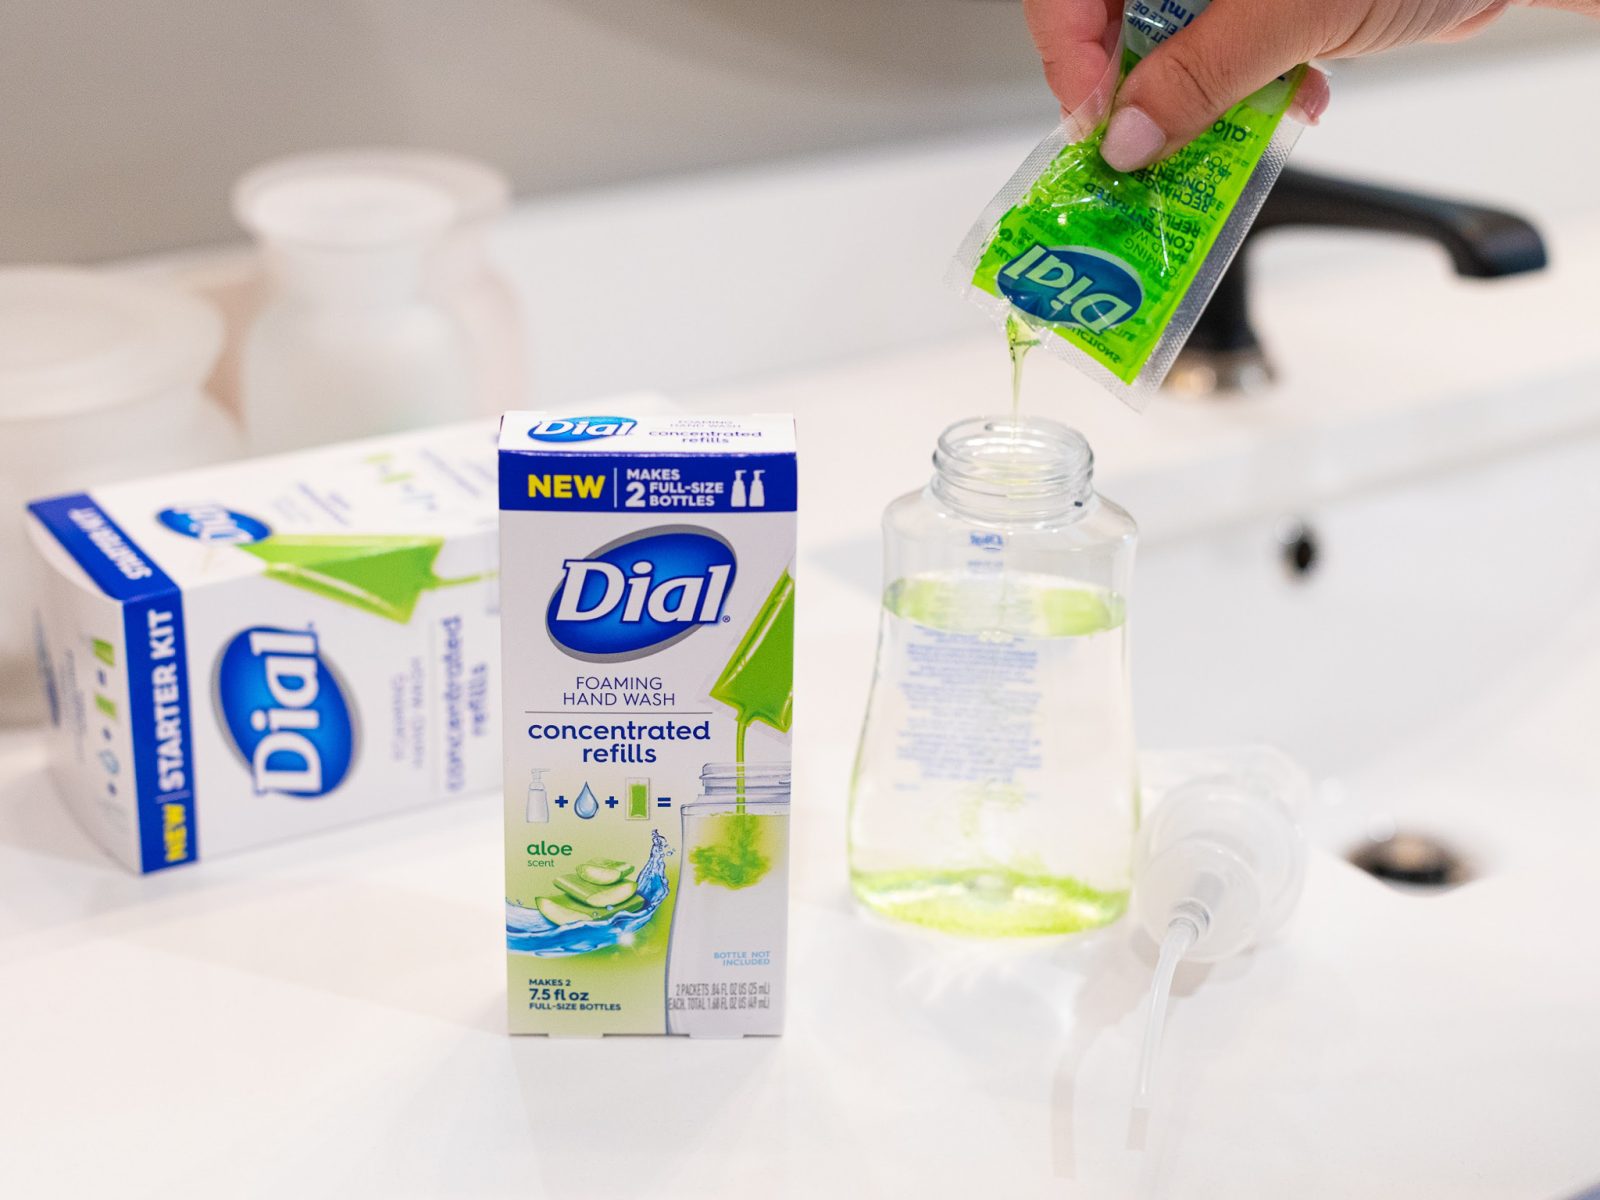 Dial Concentrated Foaming Hand Wash Refills 2-Count Just $1.49 At Kroger (Plus Cheap Starter Kits)